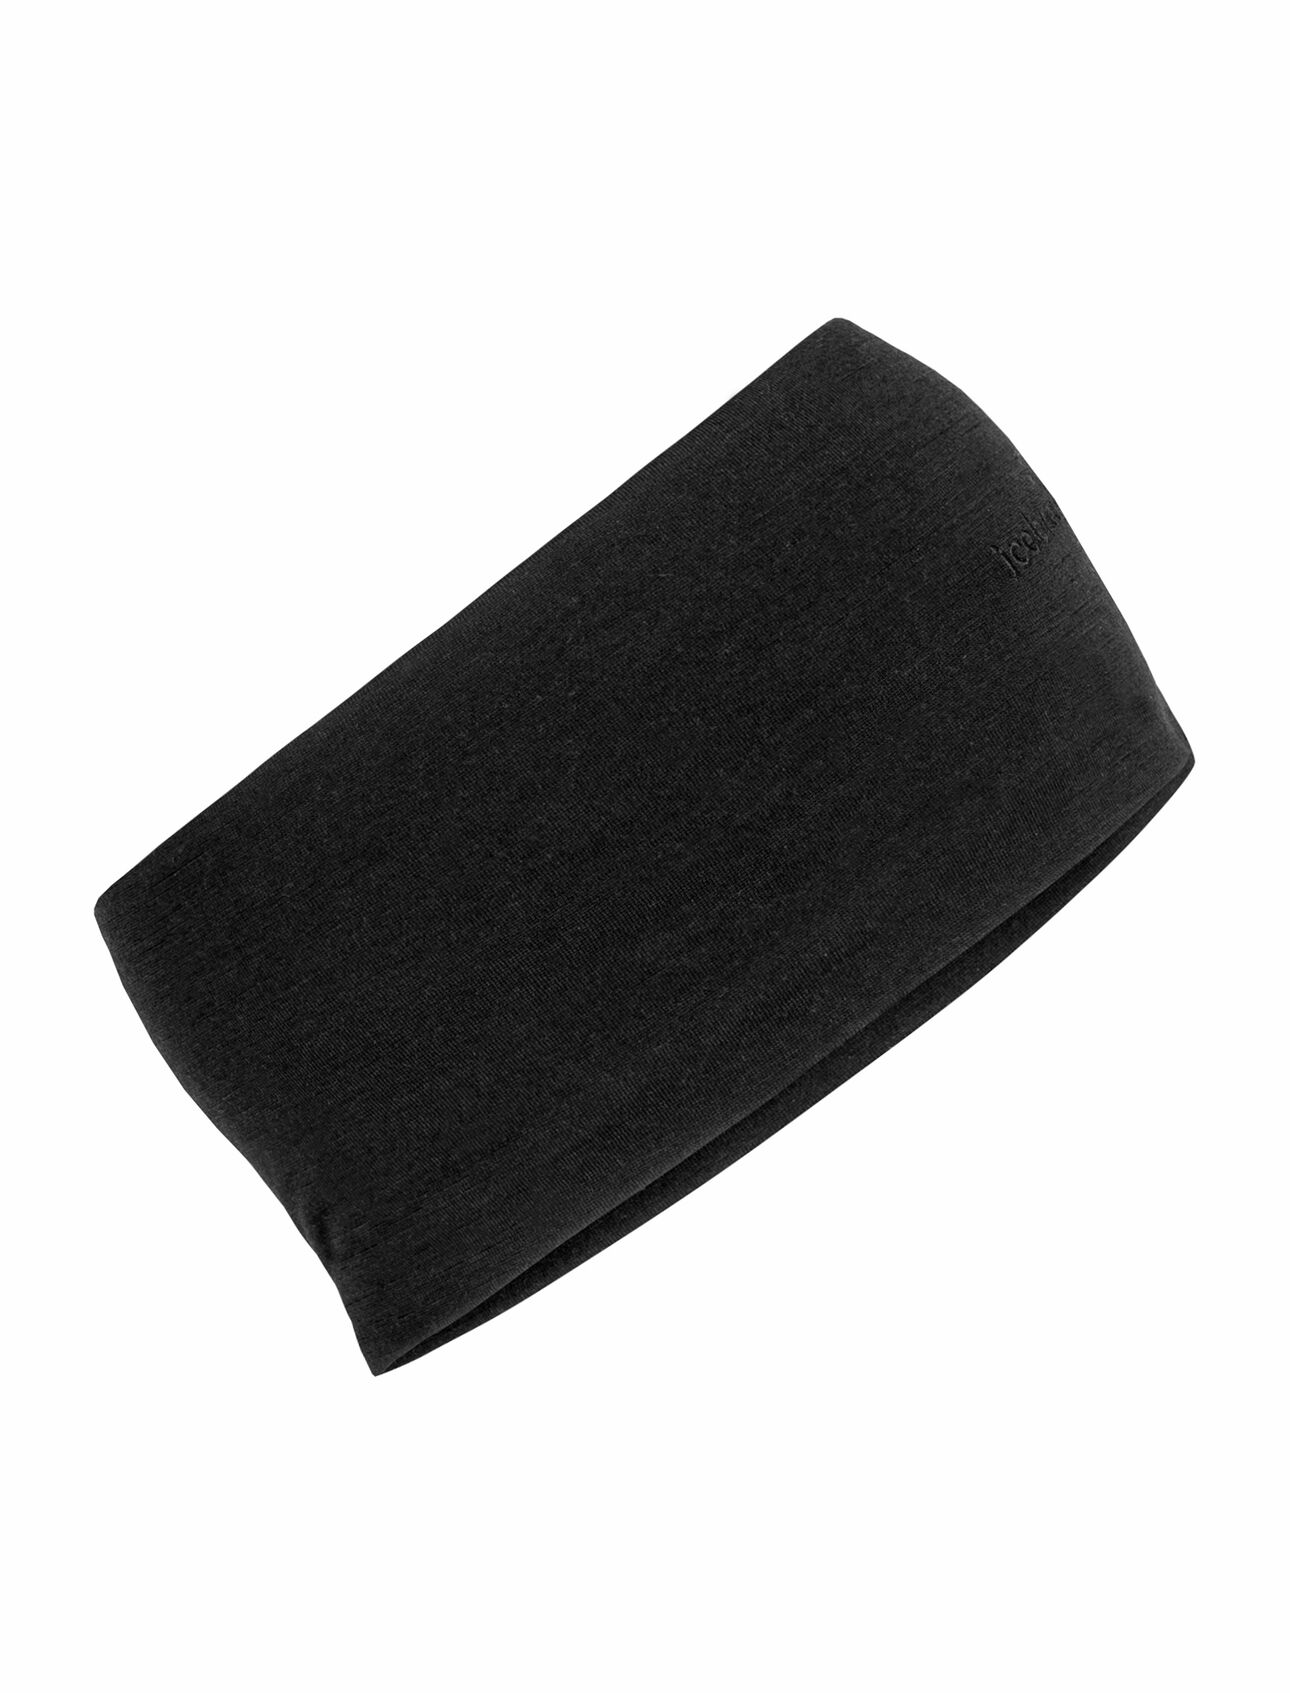 Unisex Cool-Lite™ Merino Flexi Headband Our soft and stretchy merino wool headband for year-round performance, the Flexi Headband features light, breathable and moisture-wicking Cool-Lite™ jersey fabric.